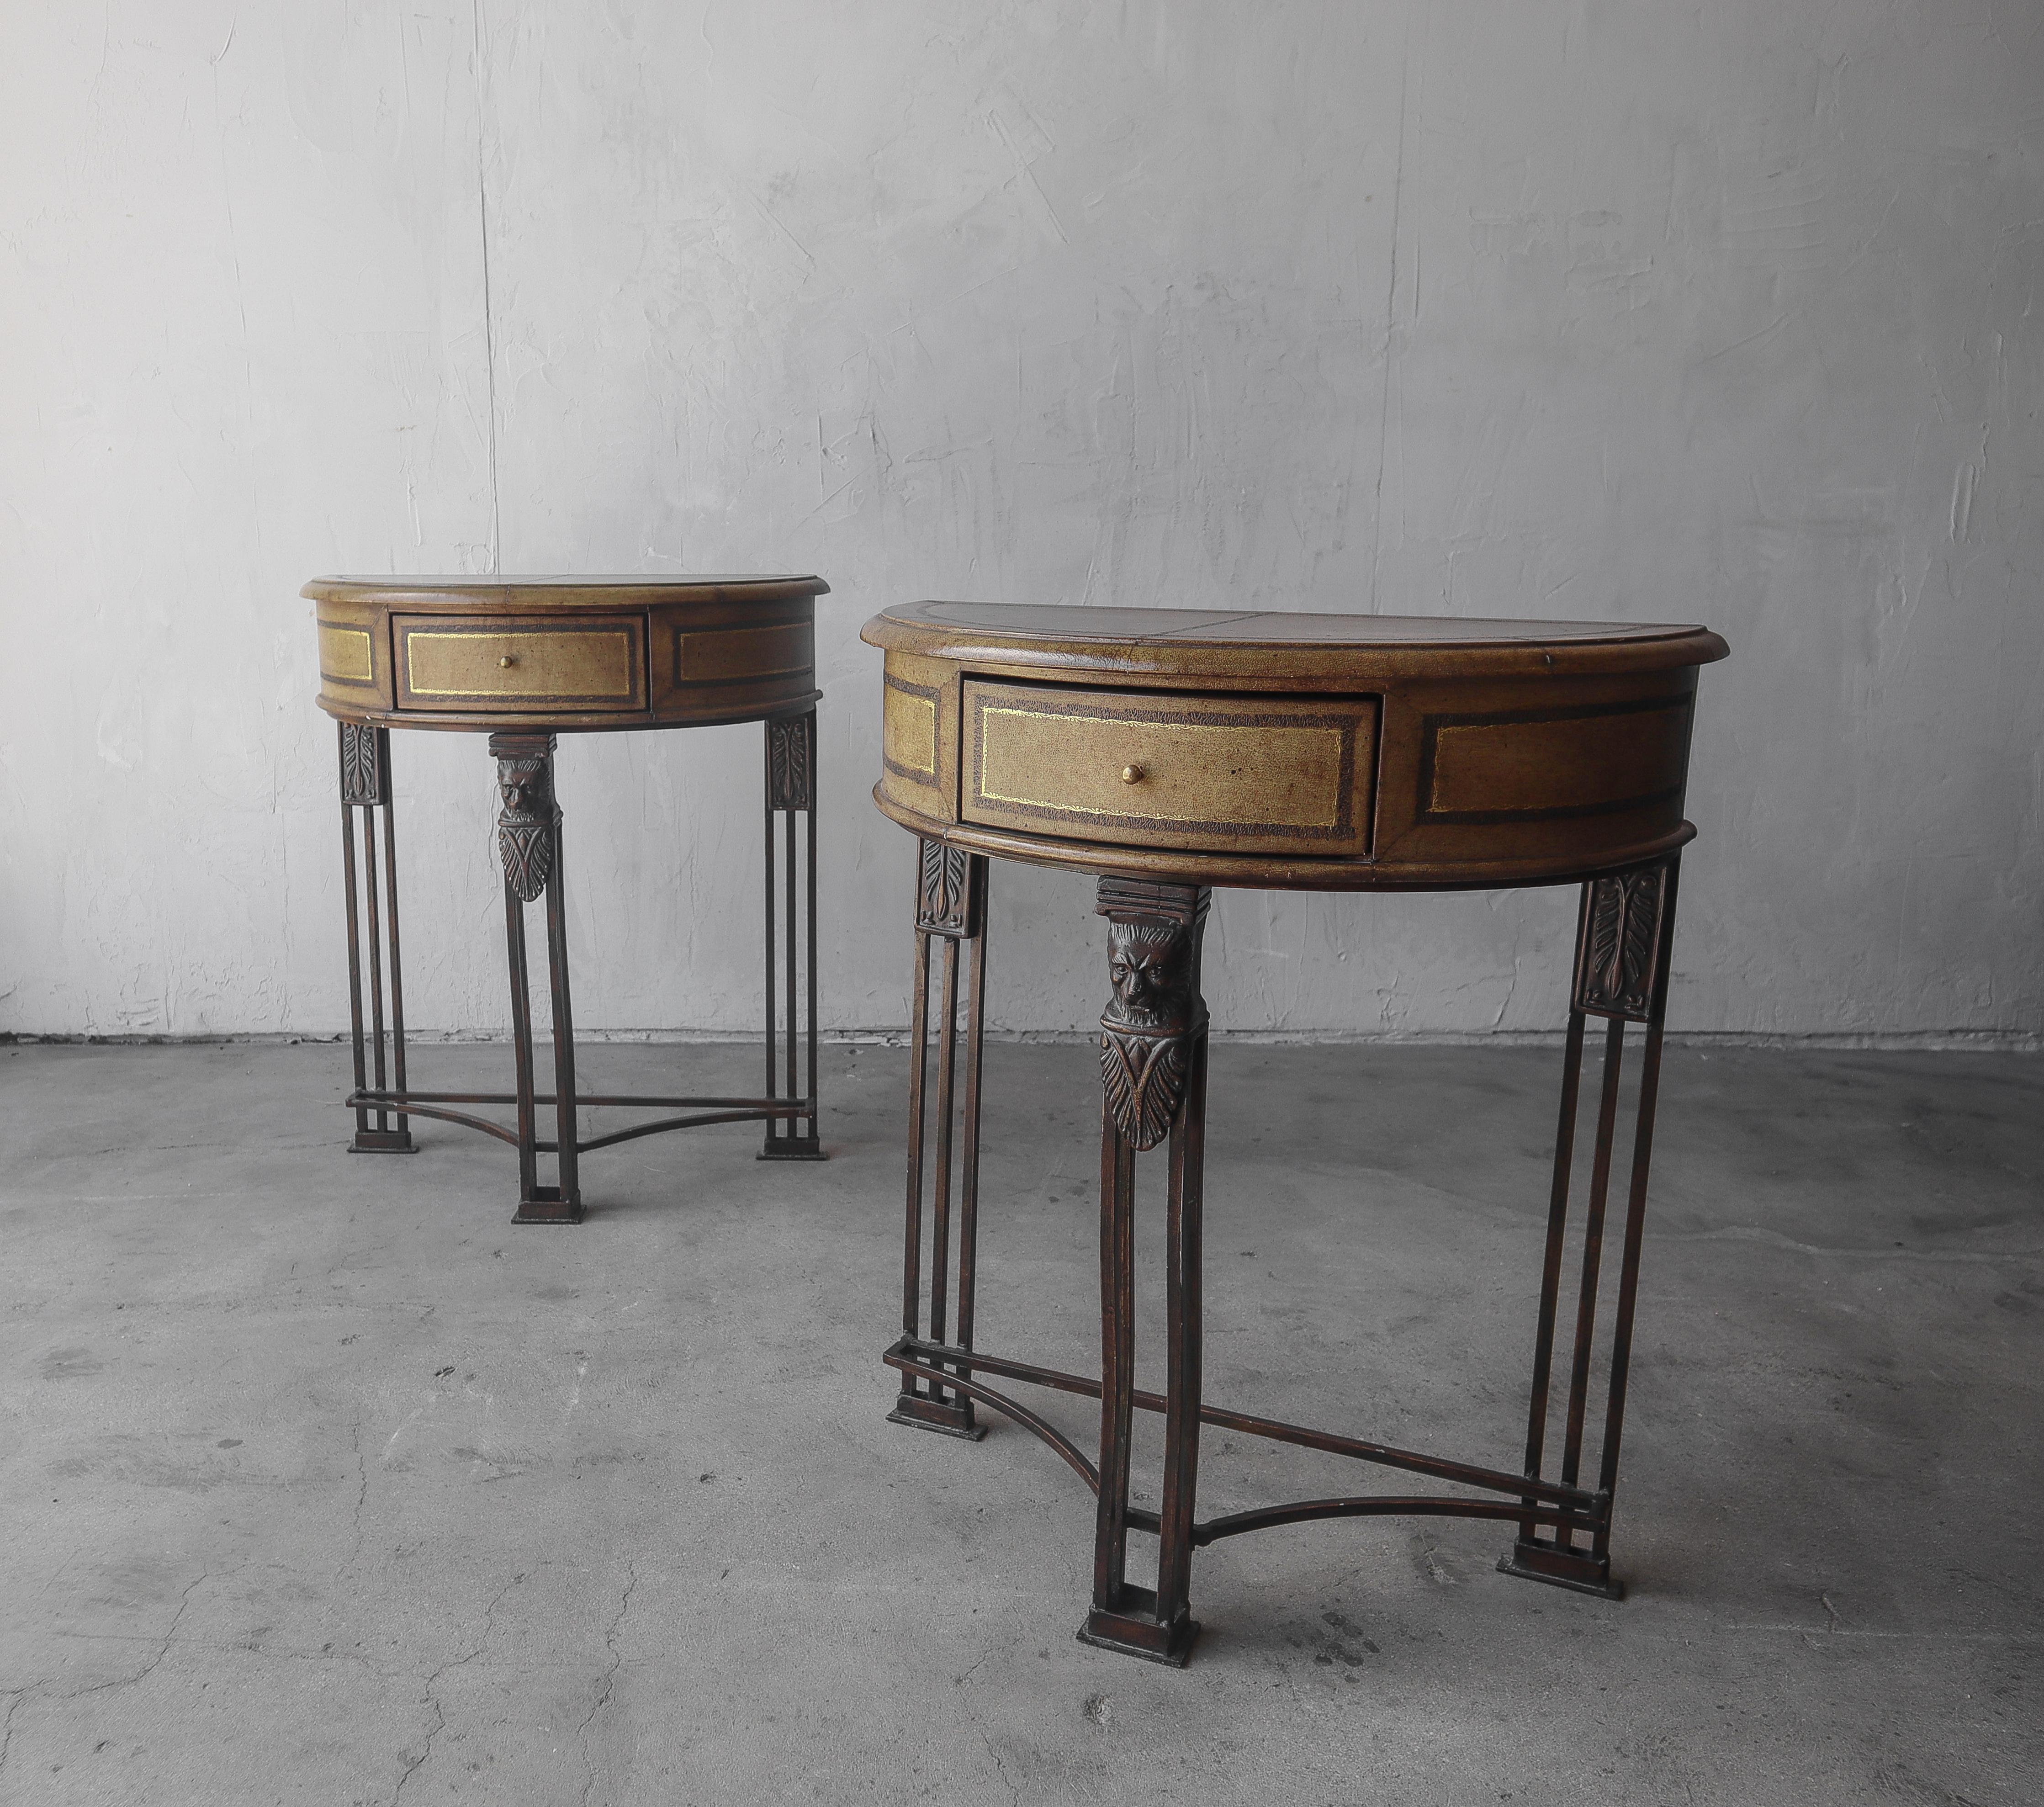 Petite pair of leather and metal demilune tables by Maitland Smith.  Each table features a single small drawer.

Tables are in overall good condition, showing some minimal signs of wear from age and use but no actual damage.